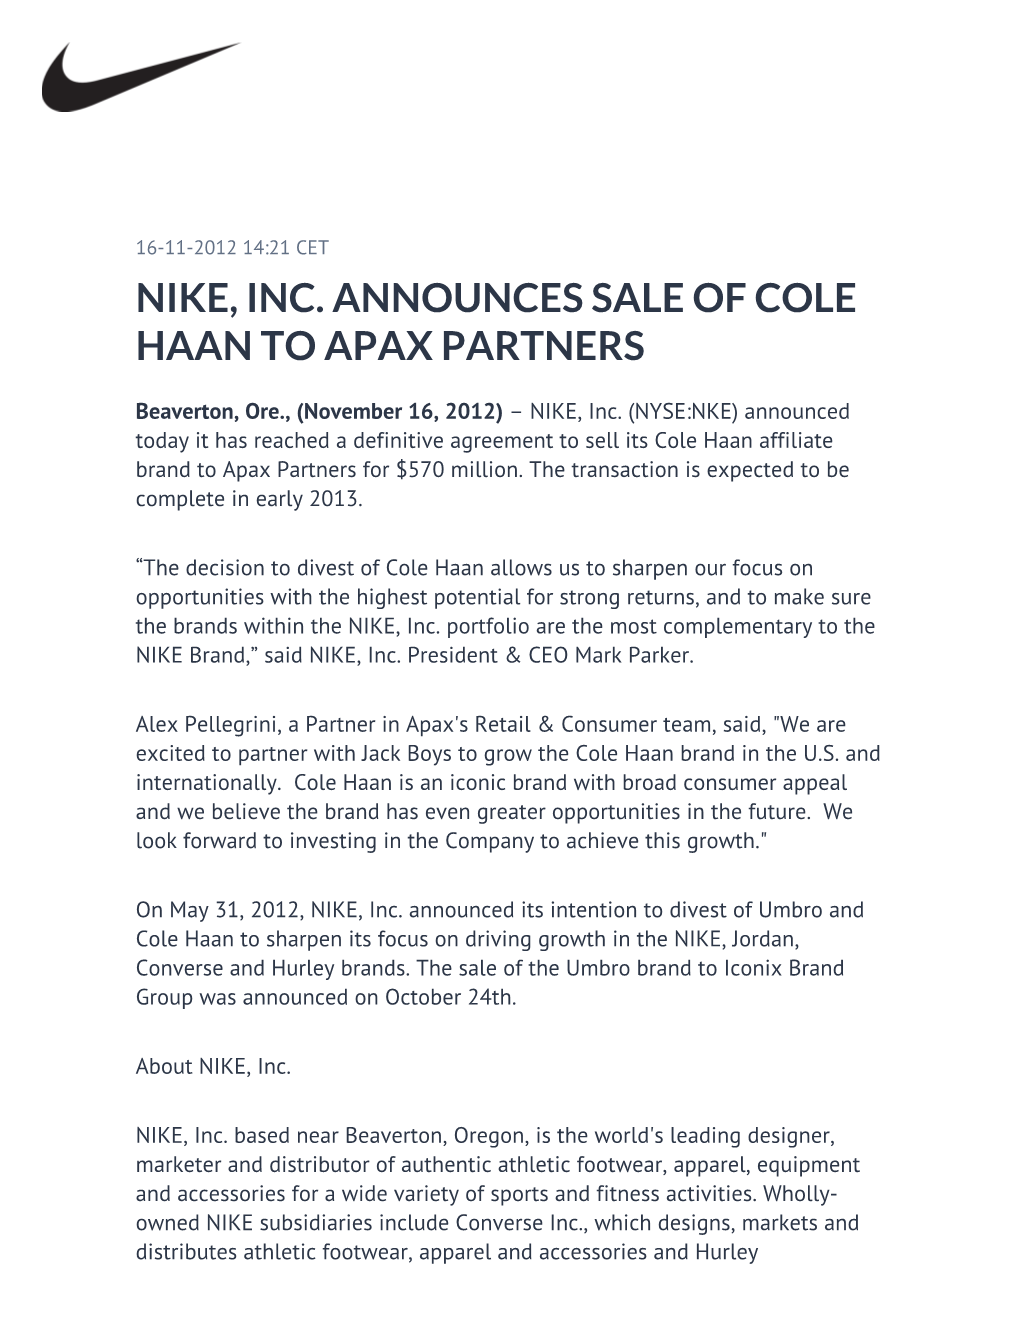 Nike, Inc. Announces Sale of Cole Haan to Apax Partners